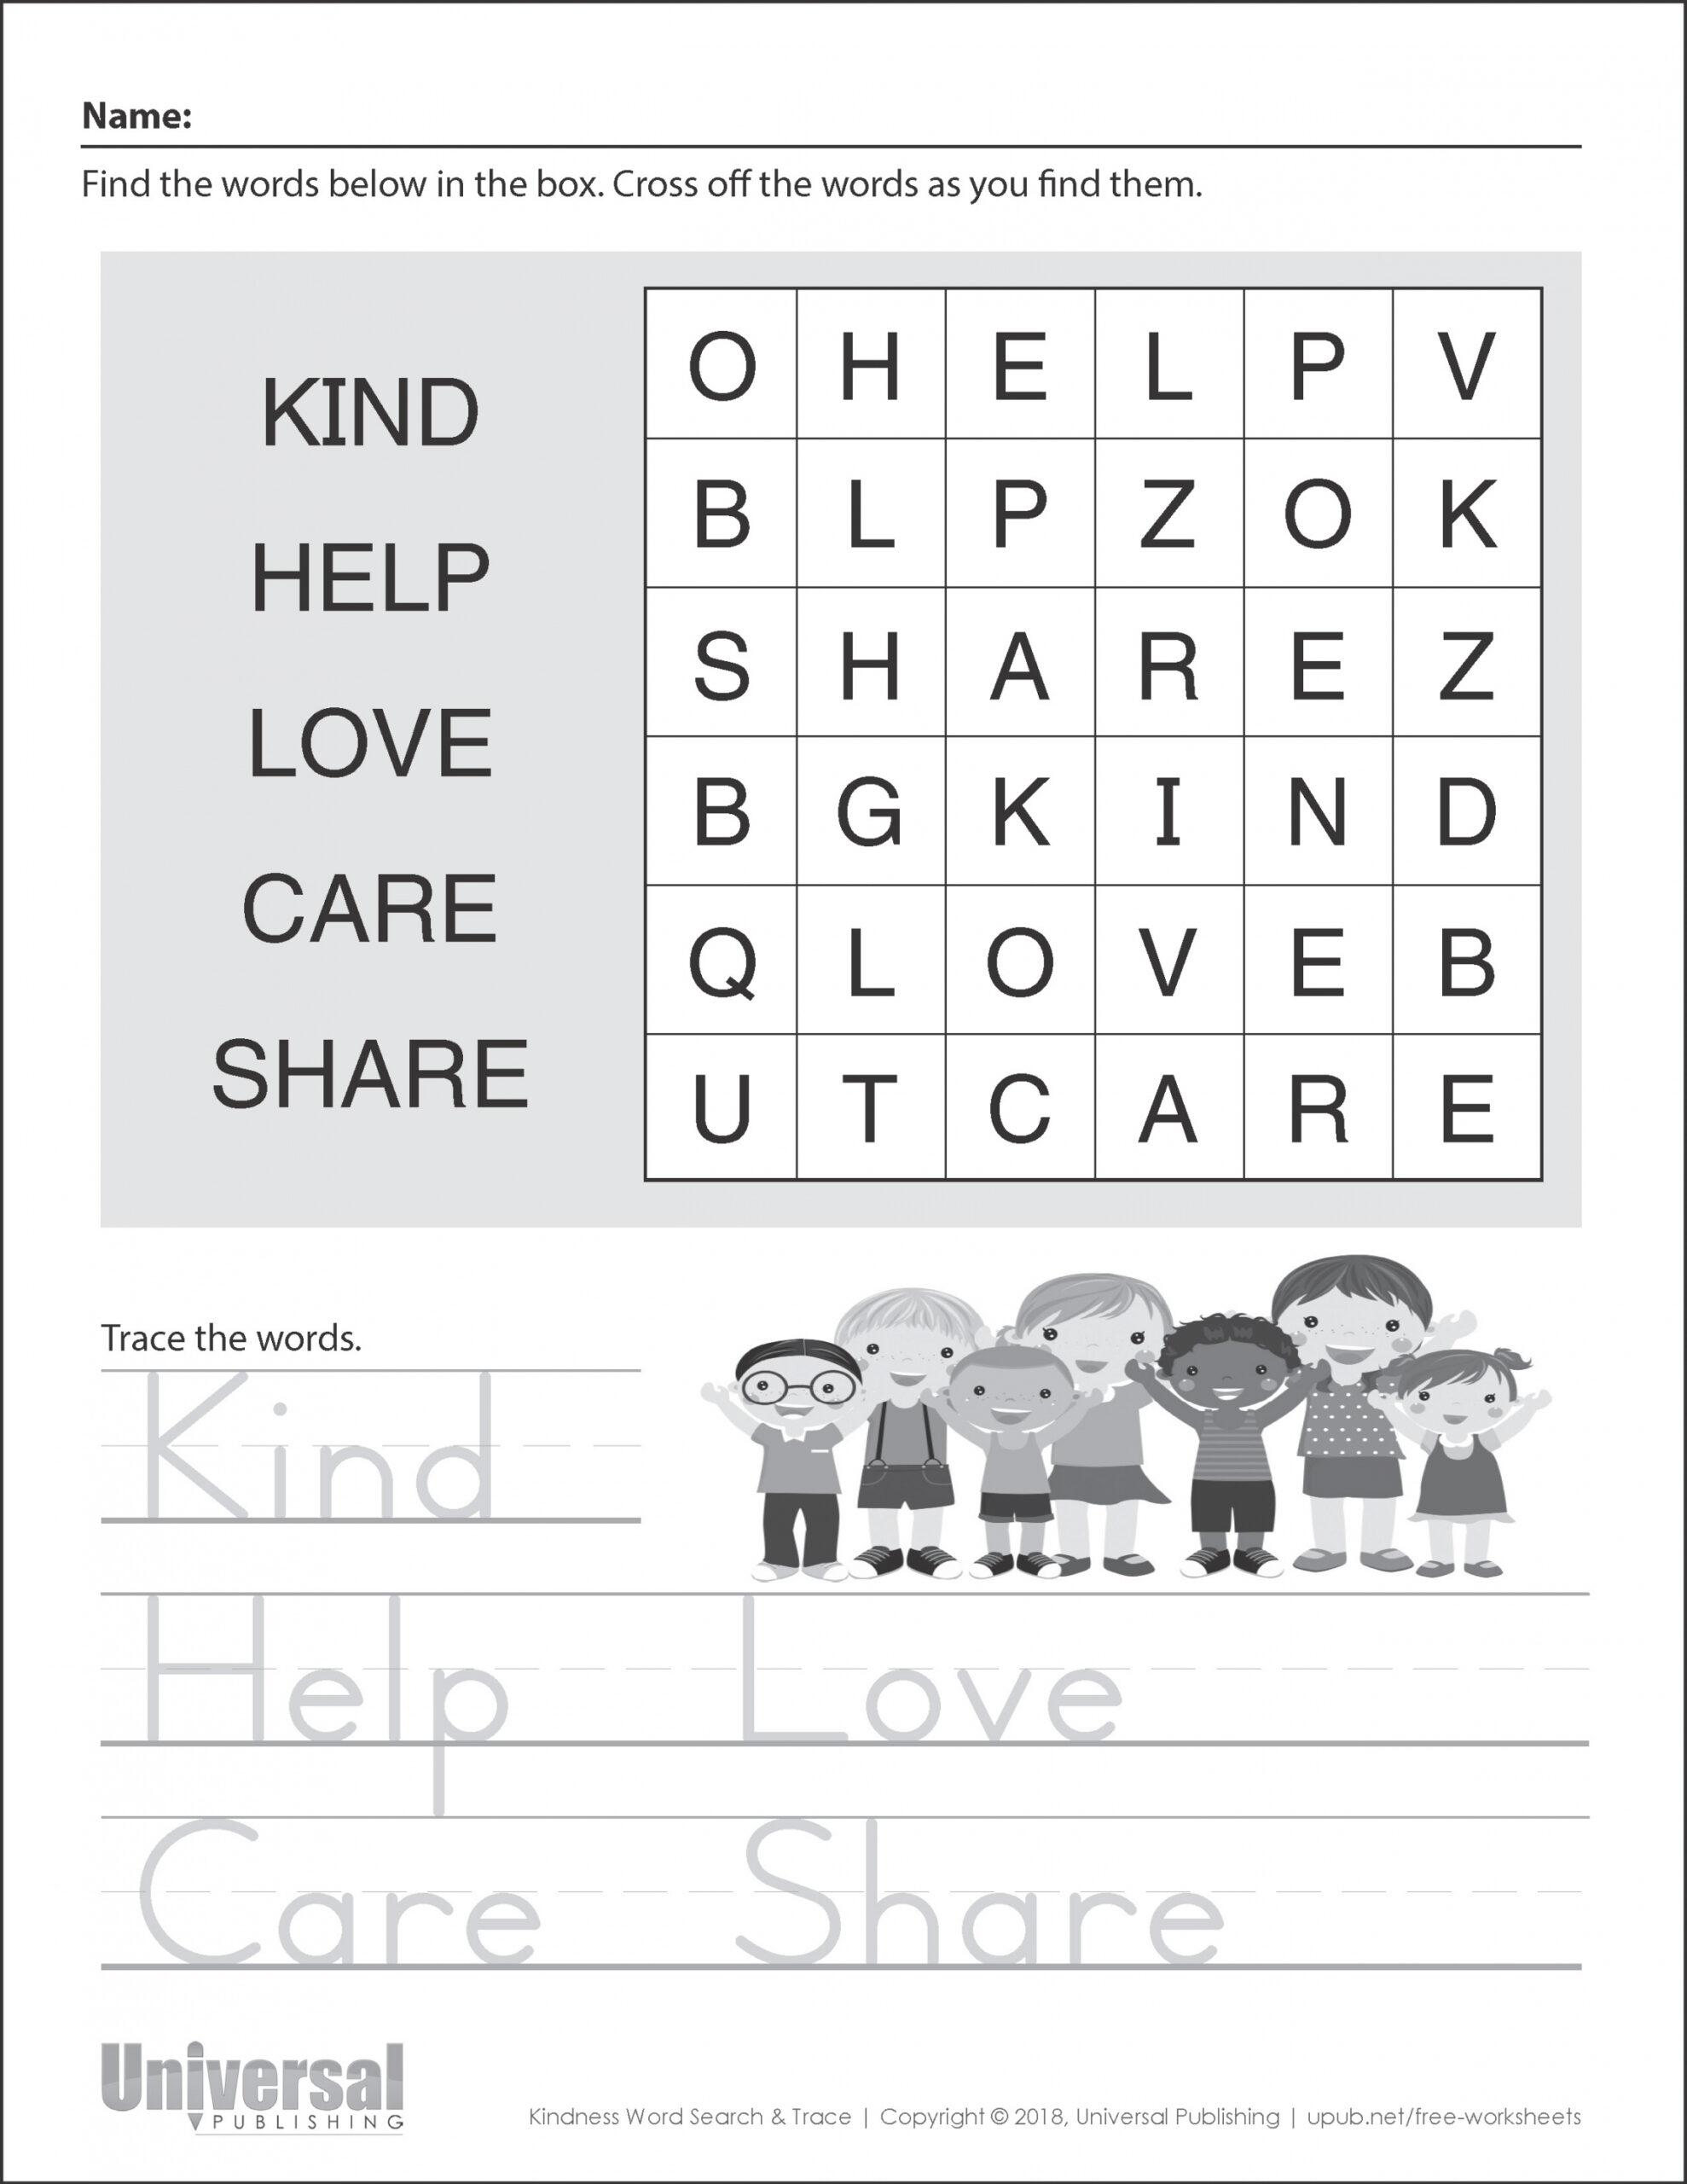 Kindness Activities  Free Printables - Universal Publishing - FREE Printables - Free Printable Kindness Worksheets